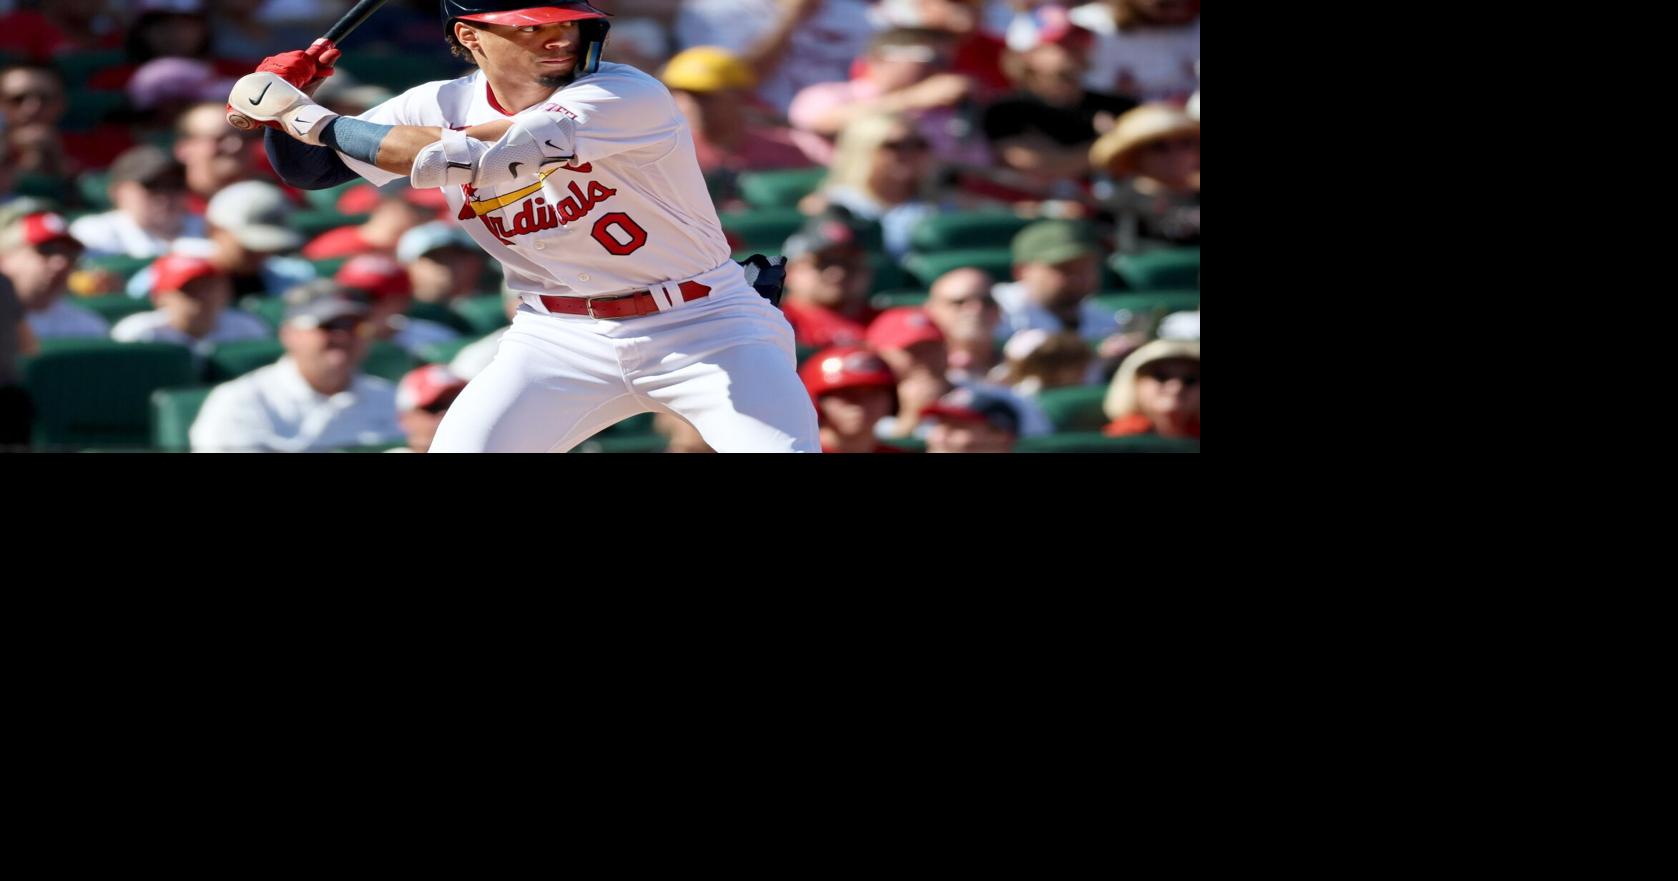 Masyn Winn's confidence high after sublime camp with Cardinals: 'I